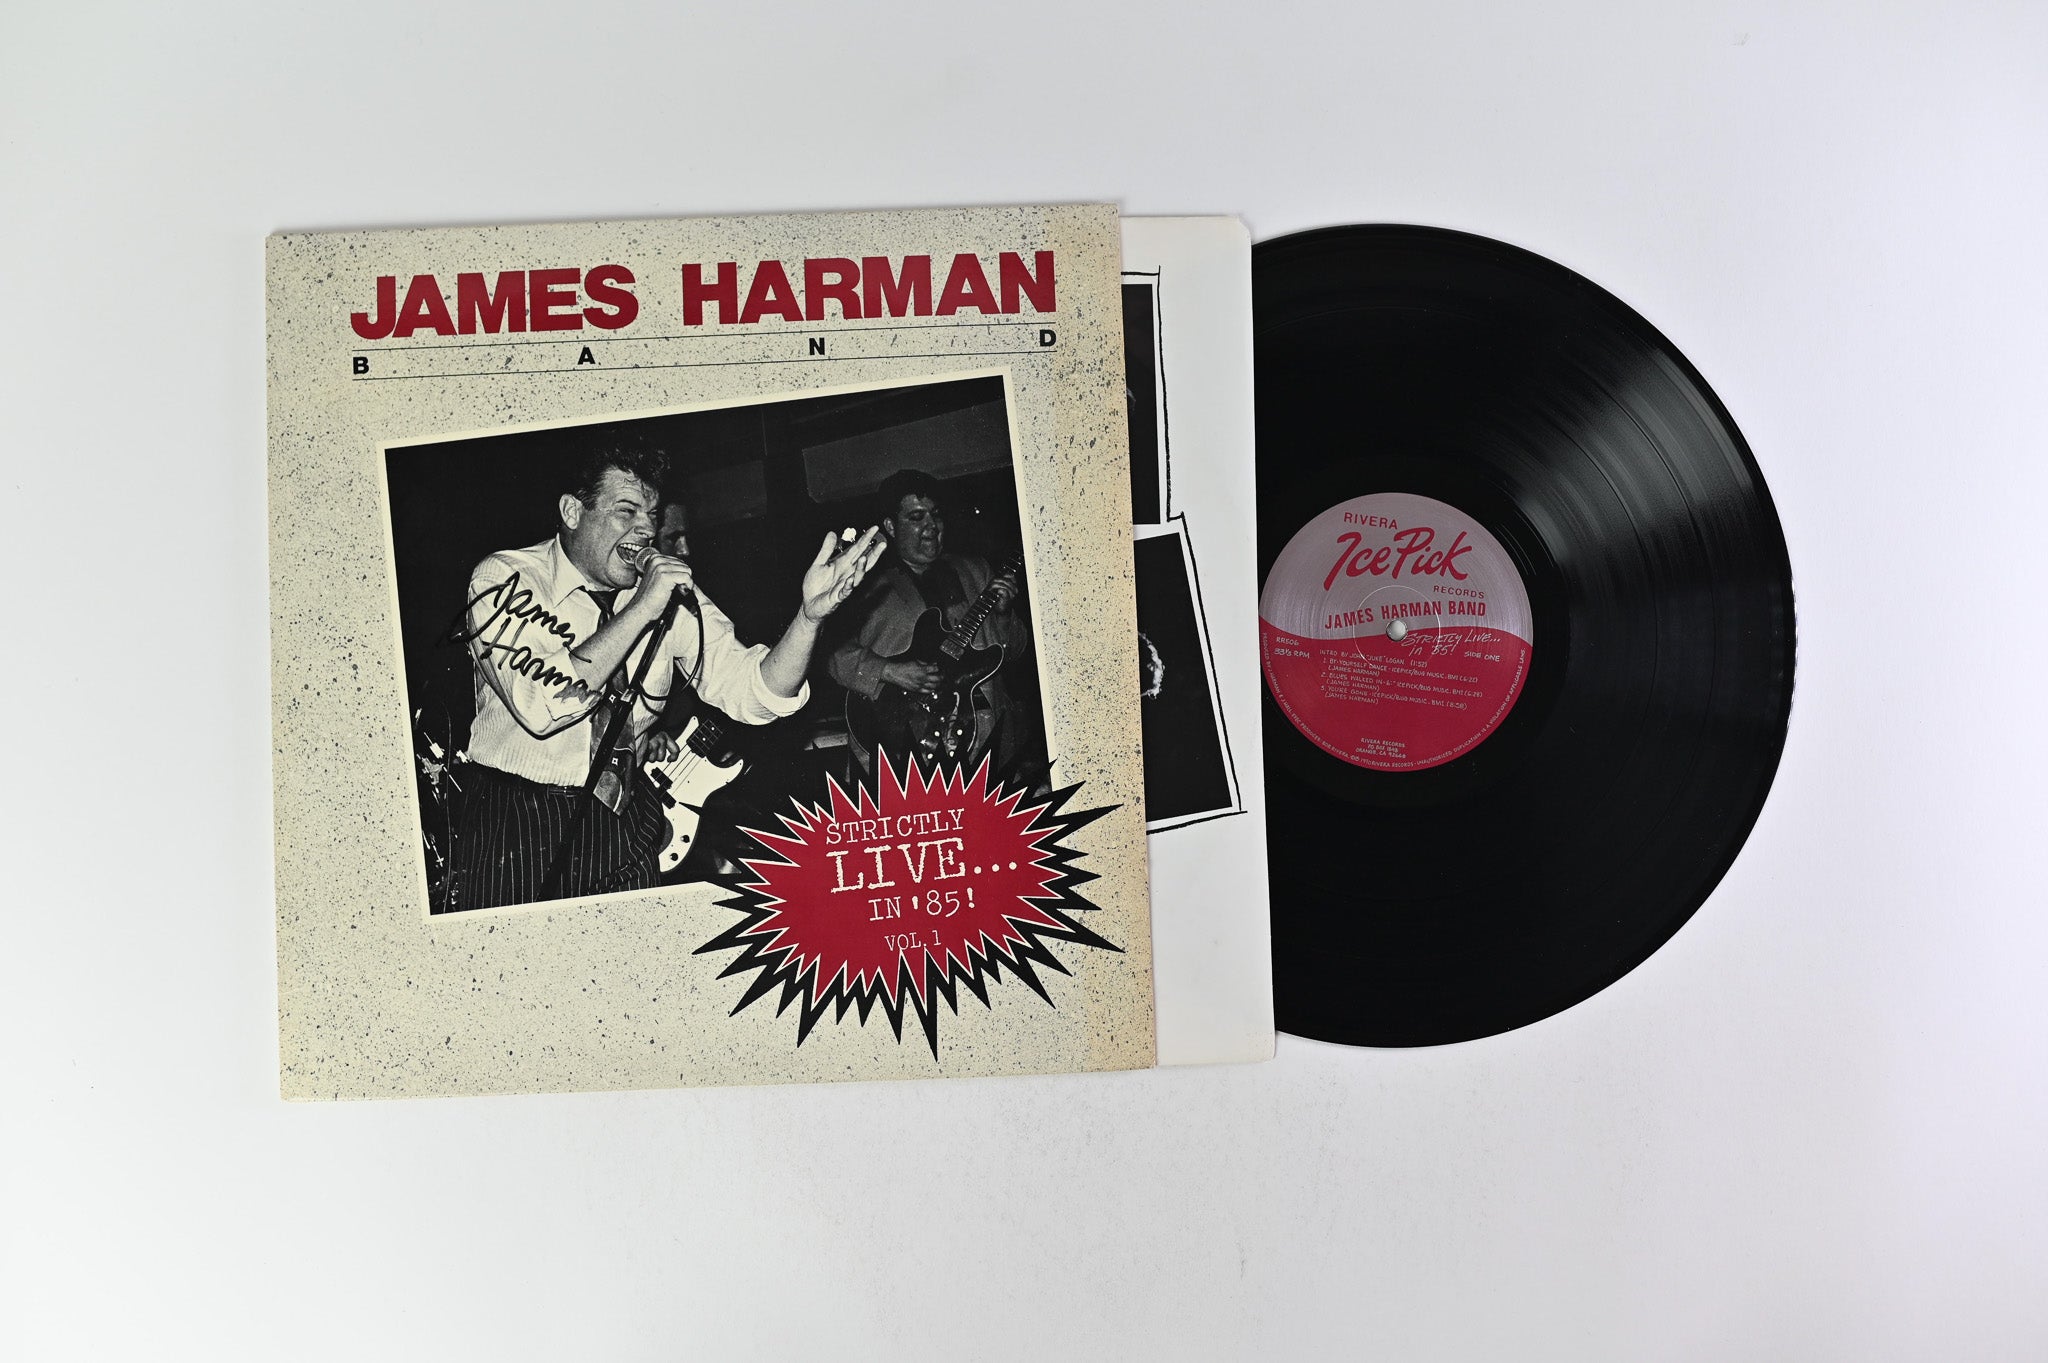 James Harman Band – Strictly Live... In '85! Vol. 1 on Rivera Records / Ice Pick Records